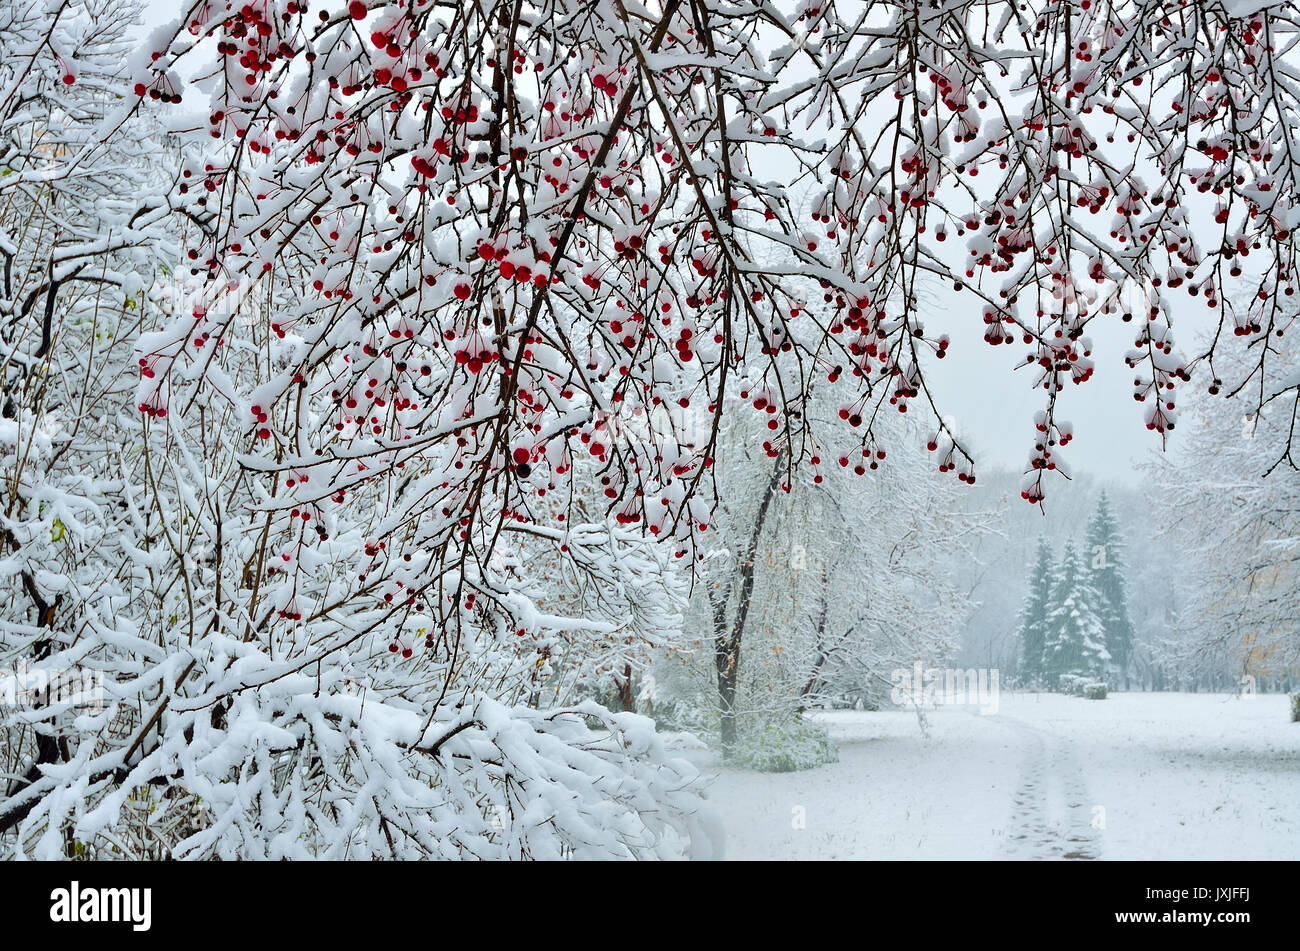 A snow-covered branch of wild apple tree with red fruits in the foreground and the footpath leading off in the winter park Stock Photo